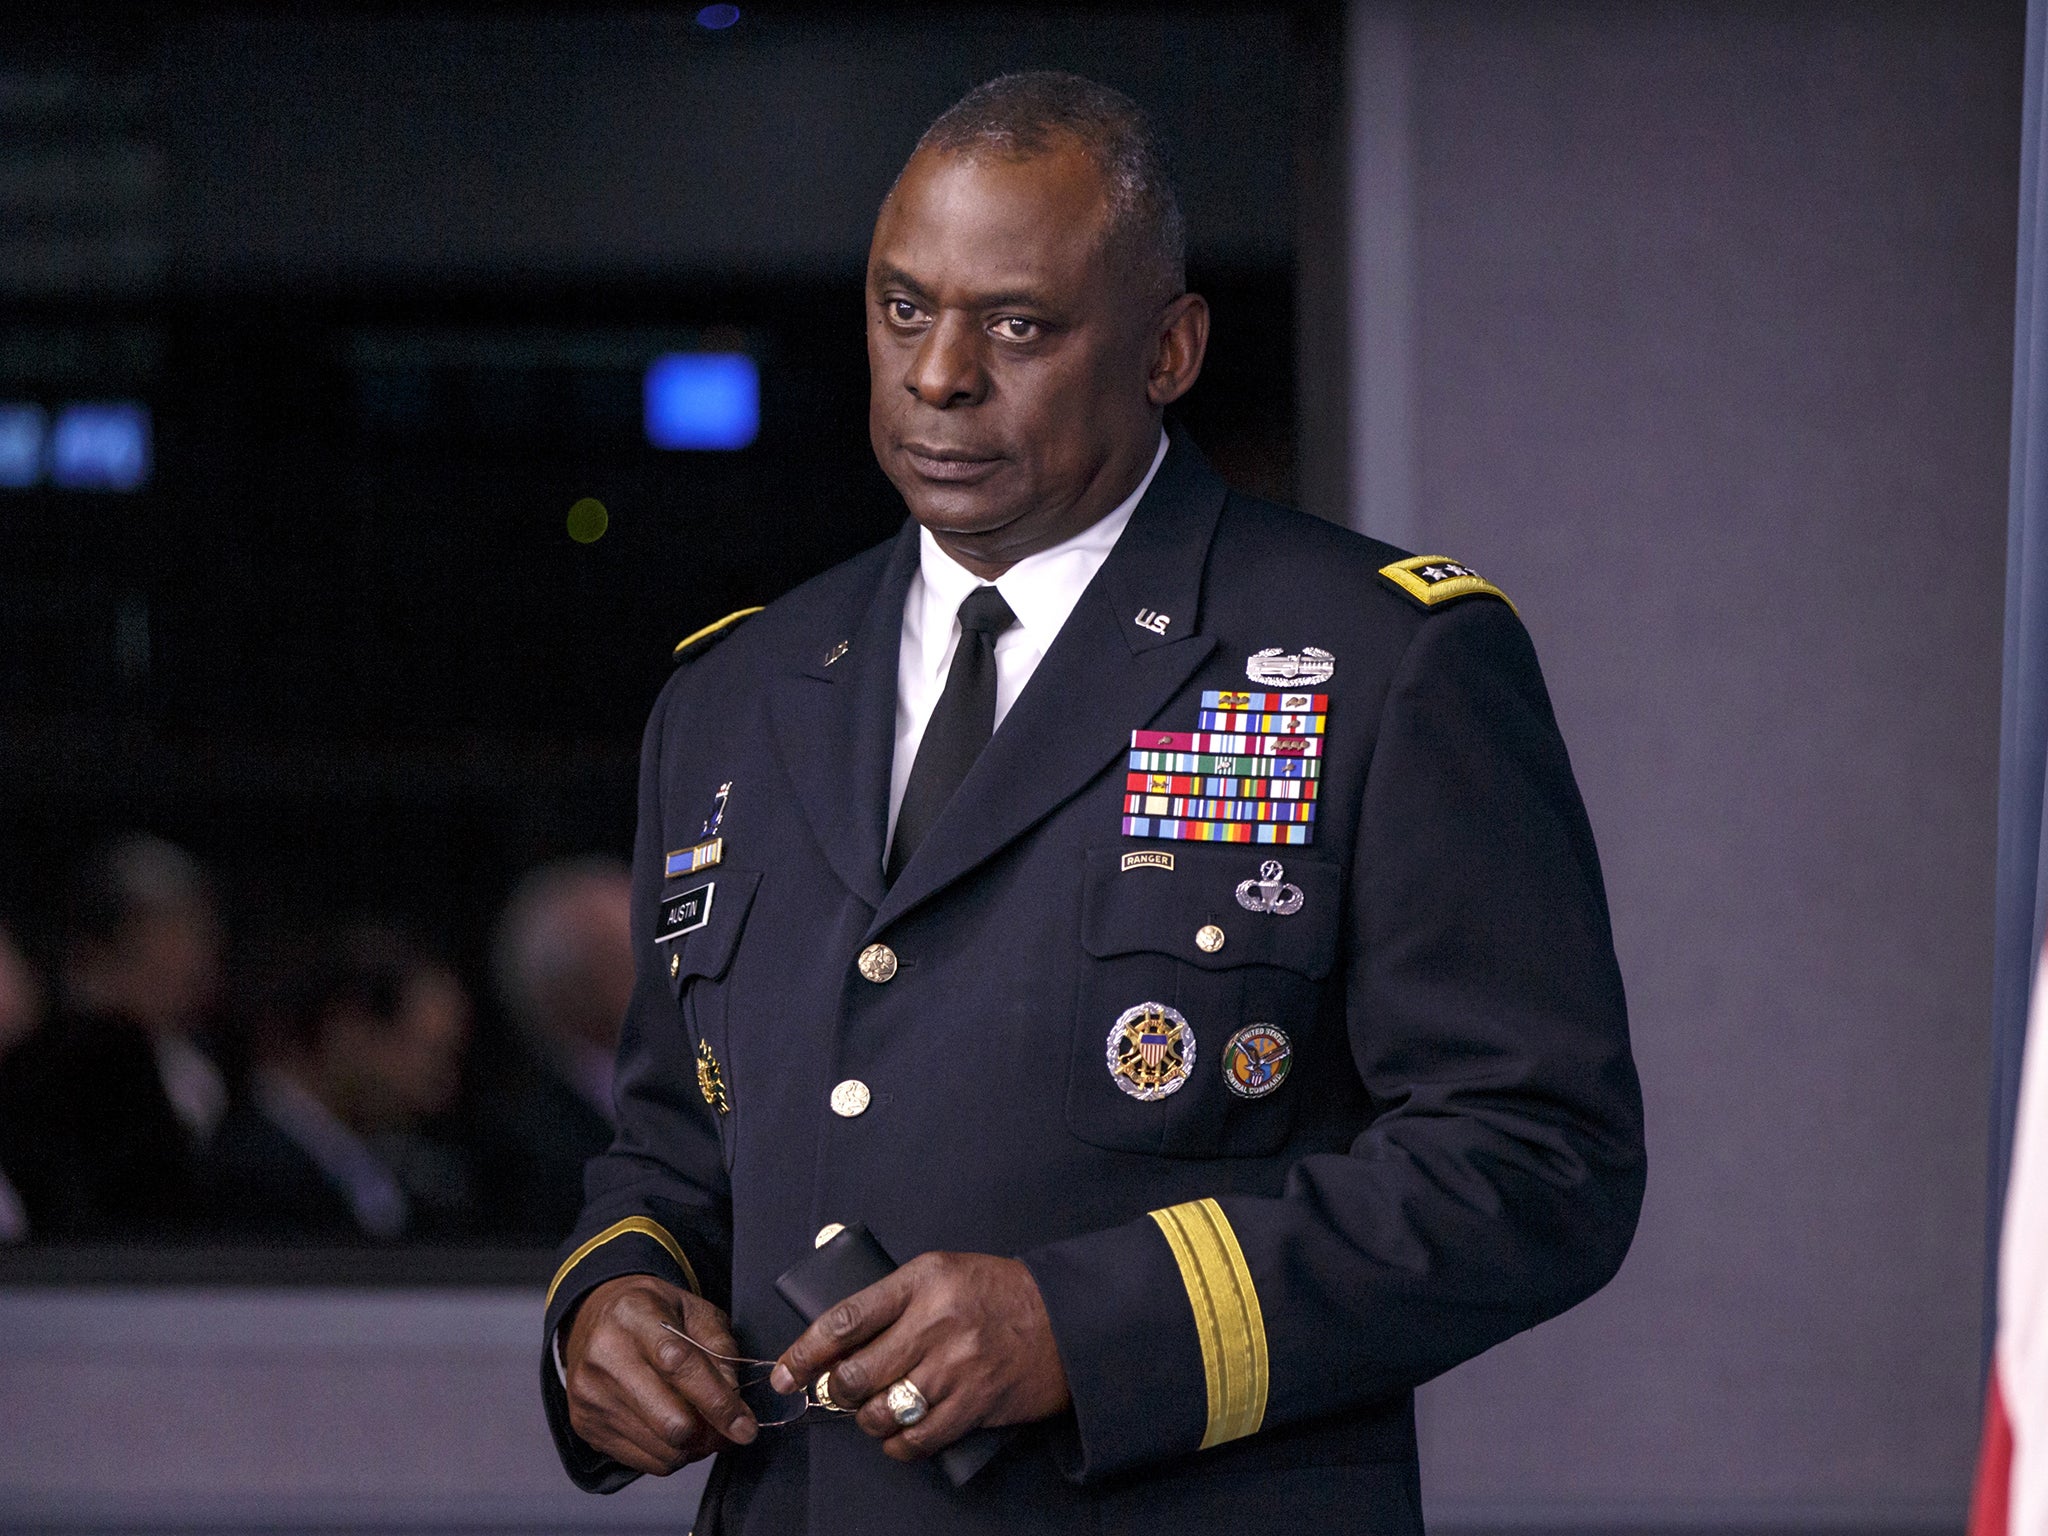 America’s top commander for the Middle East, General Lloyd Austin